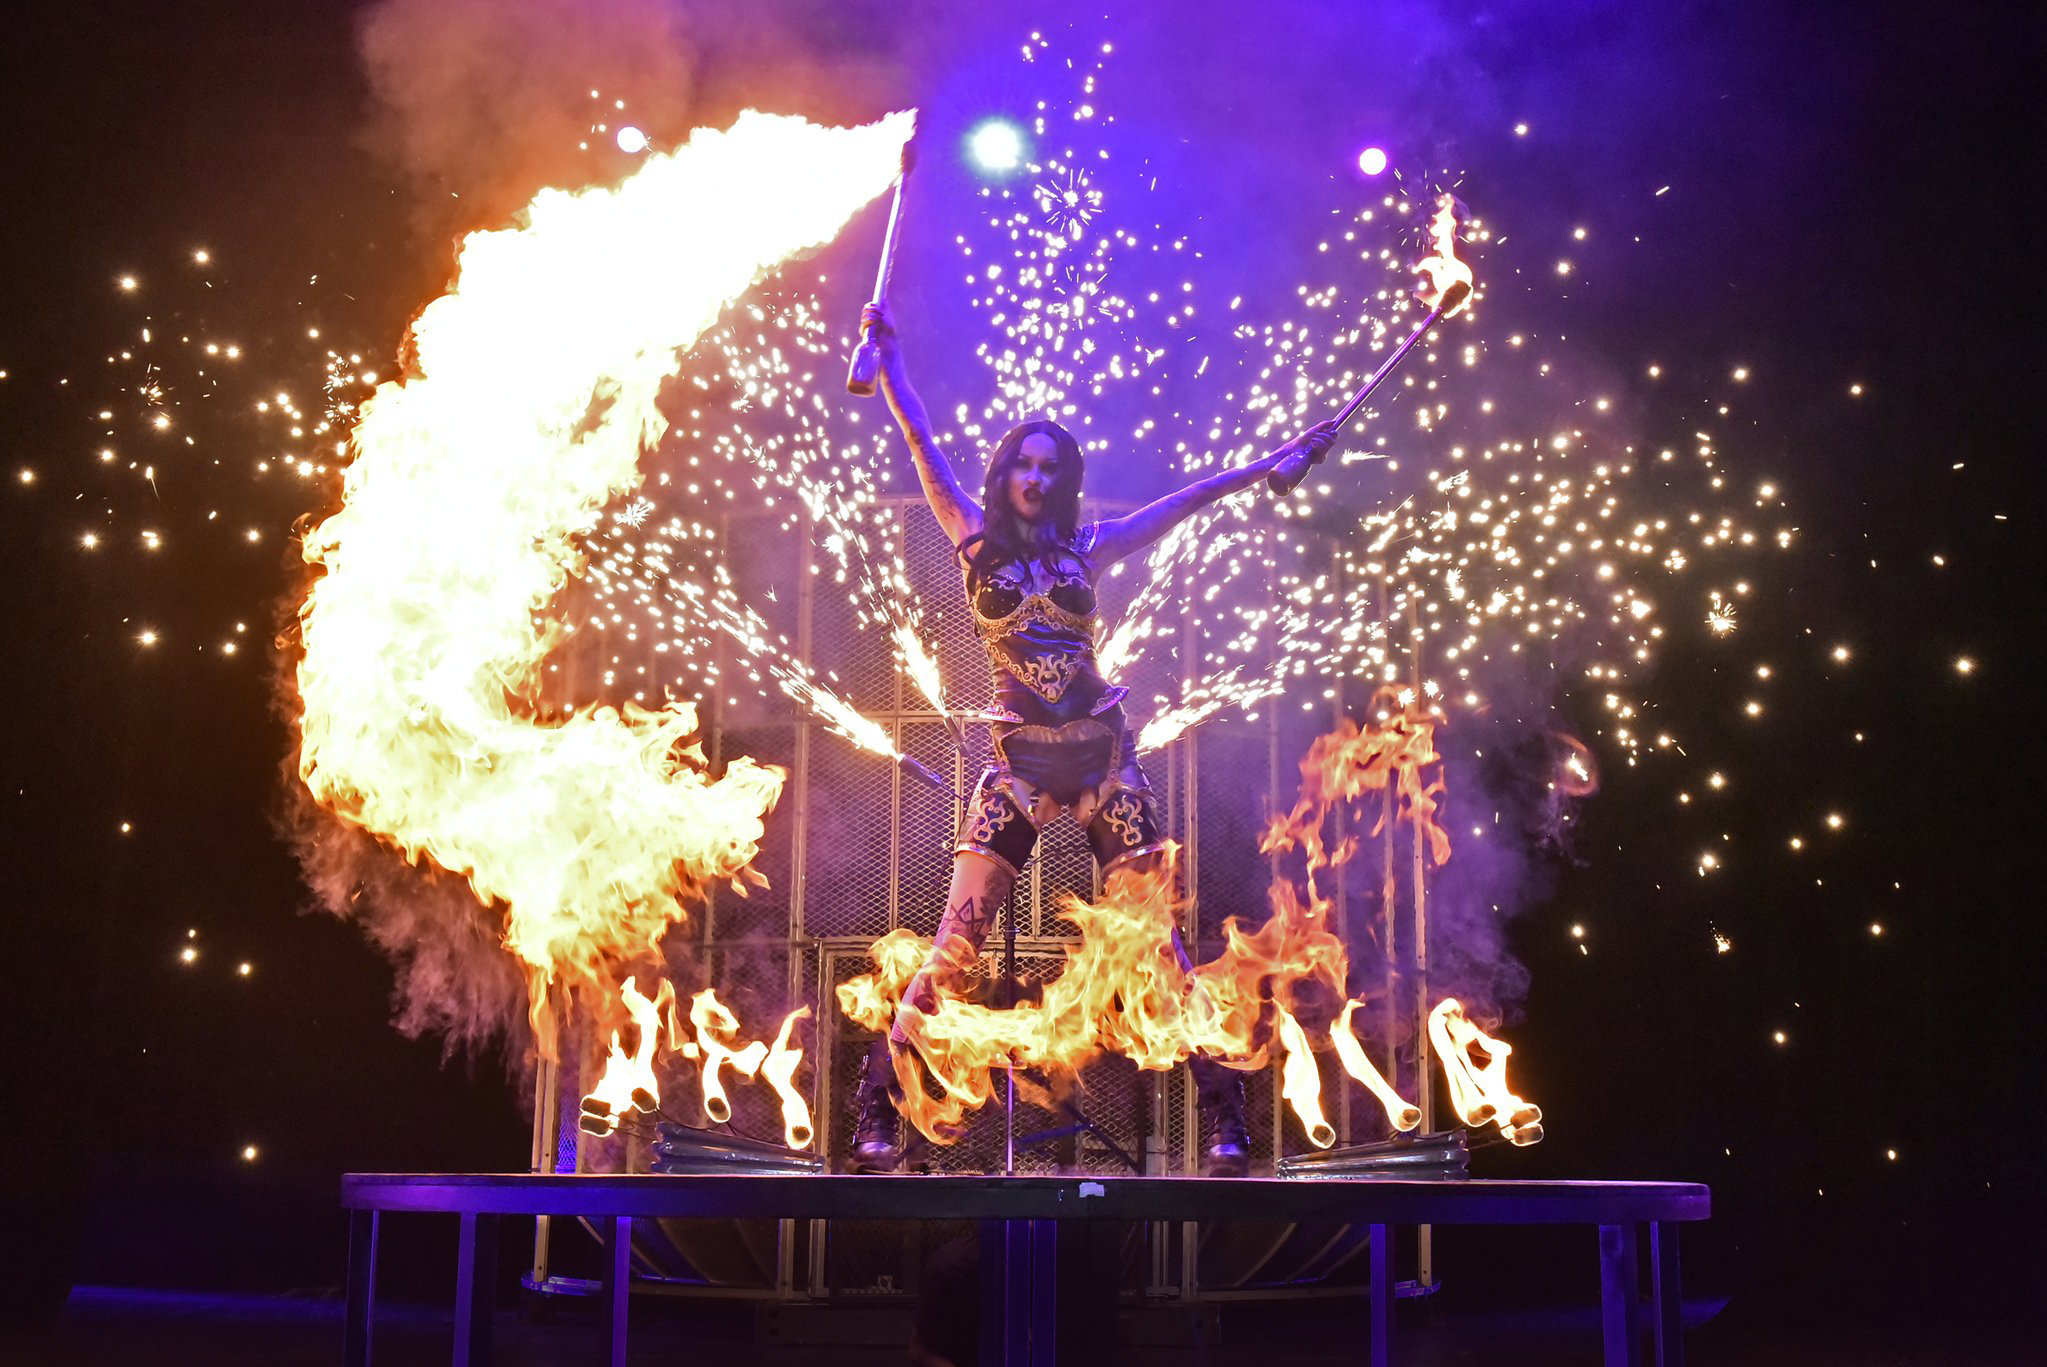 Shelly d’Inferno performing her dragon canes act.